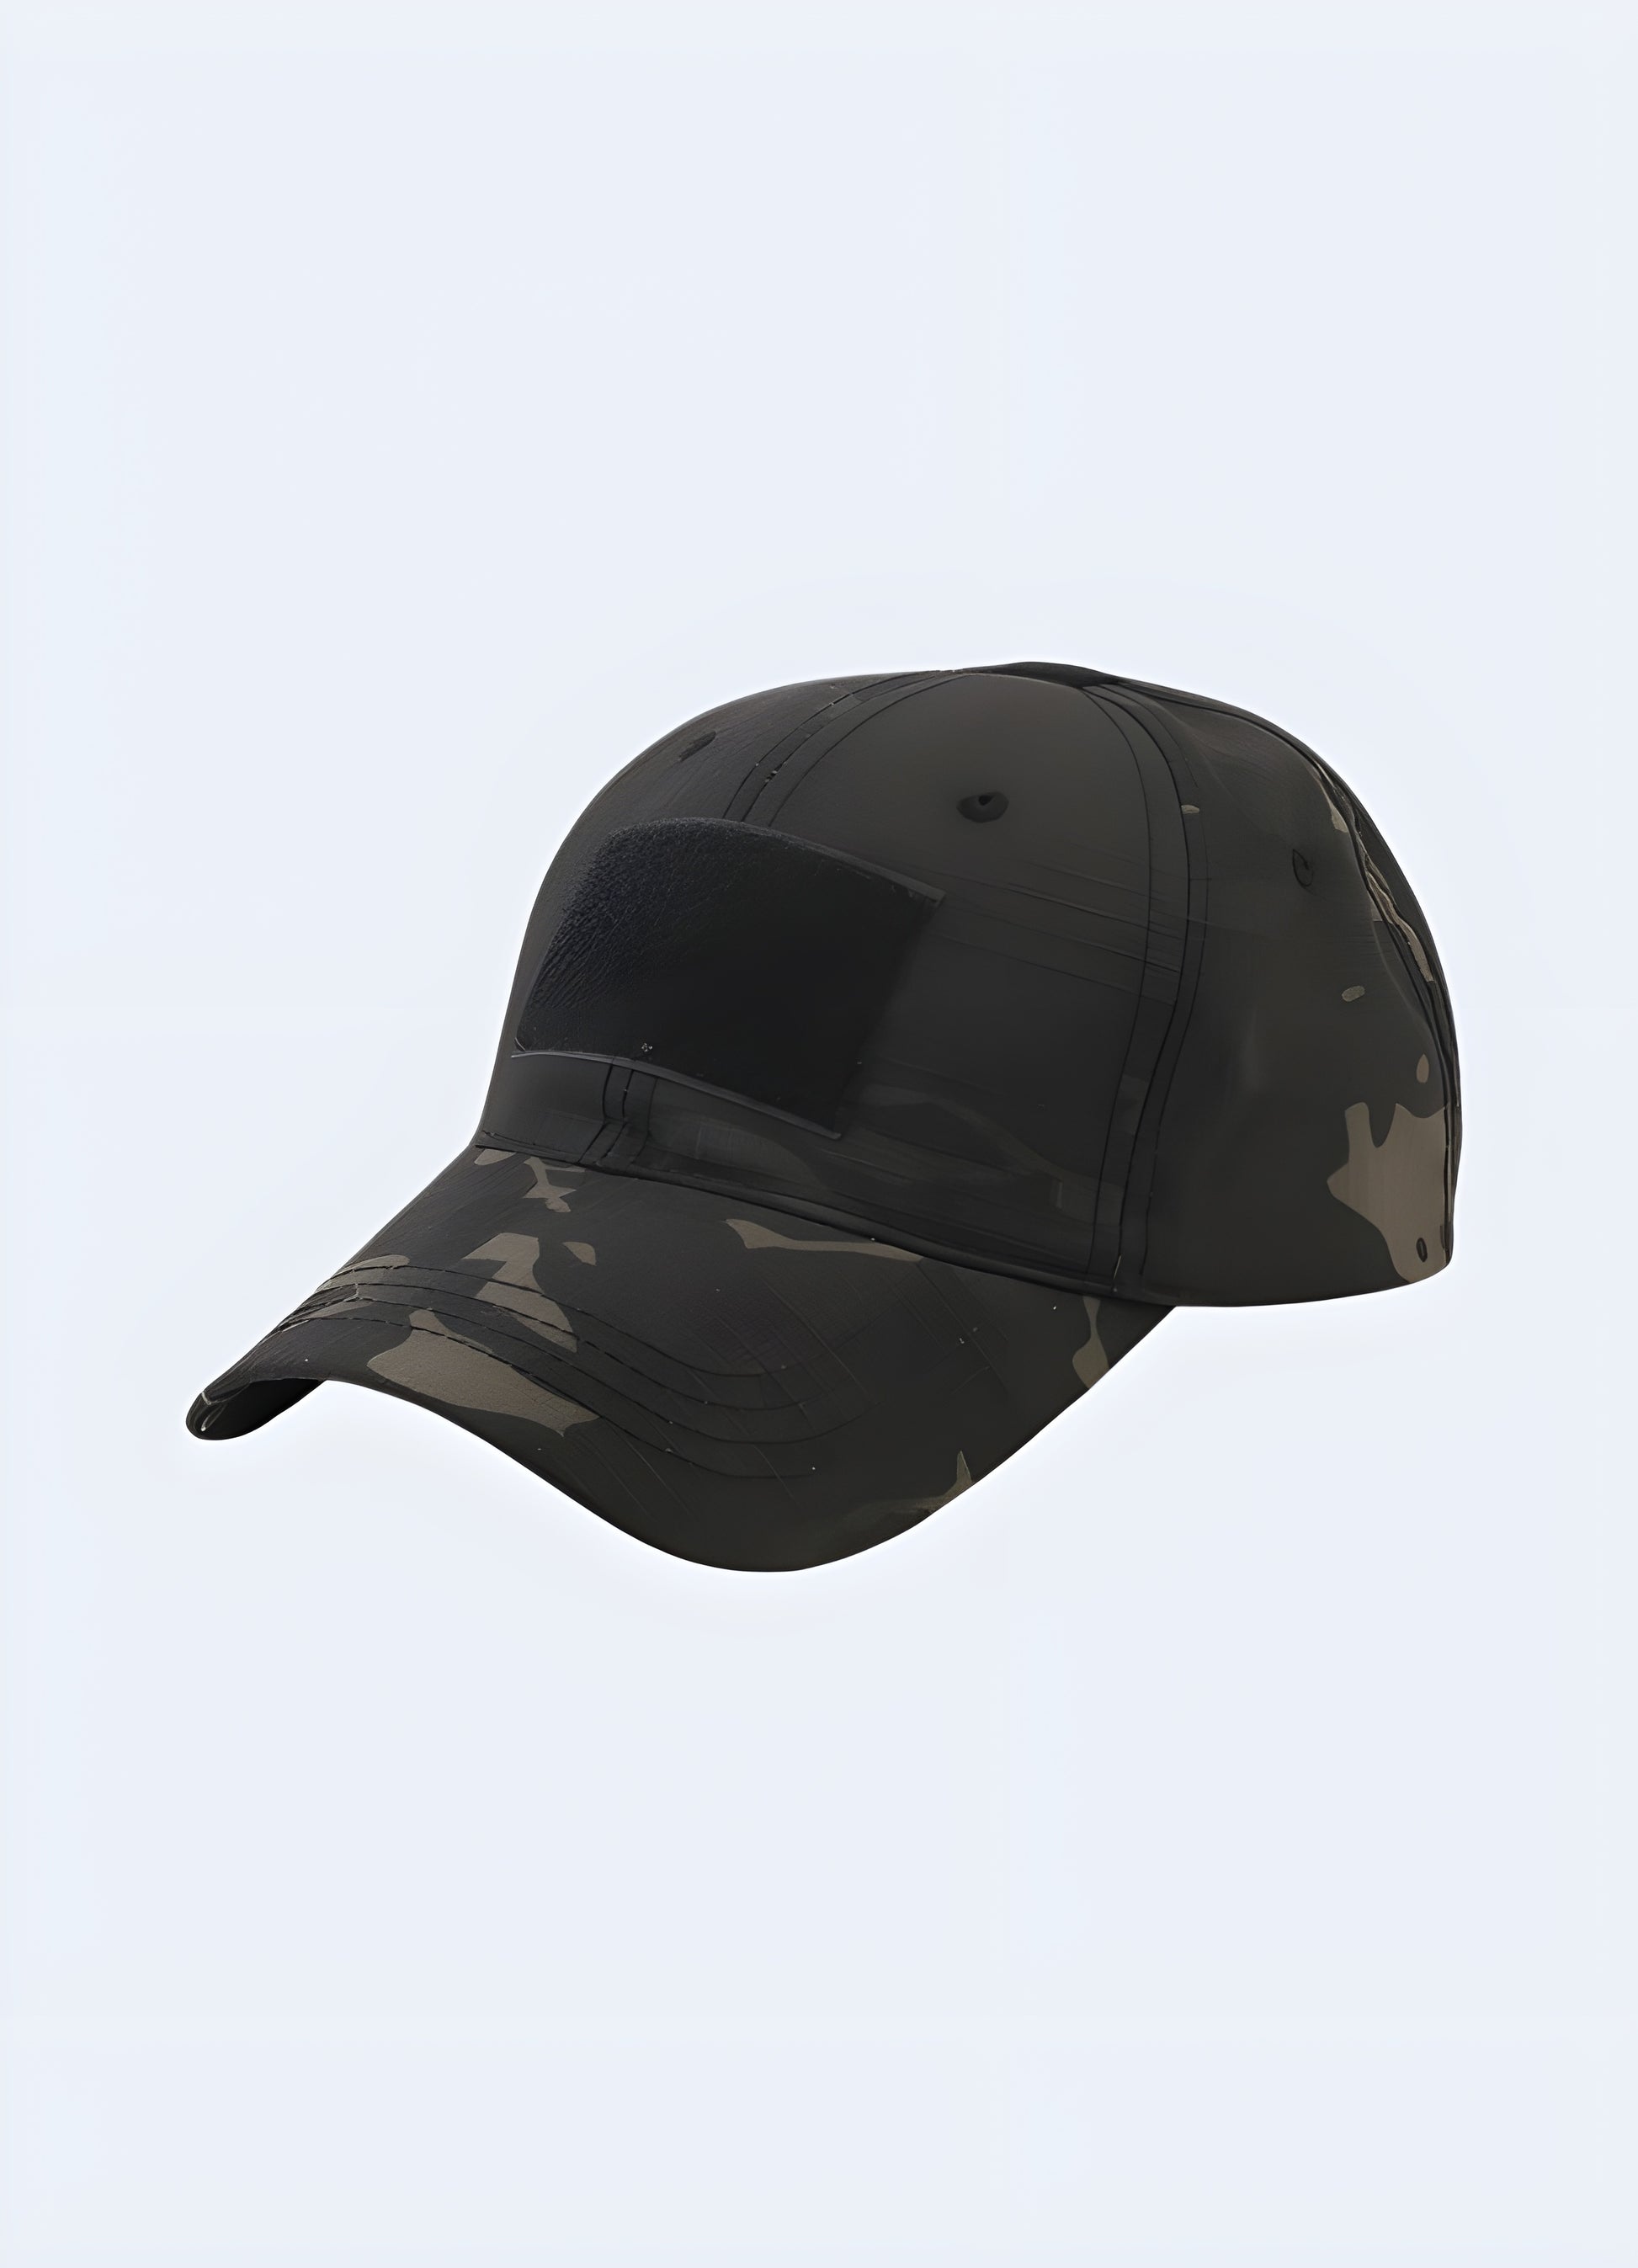 Find your perfect fit with the black tactical cap's adjustable hook and loop closure.